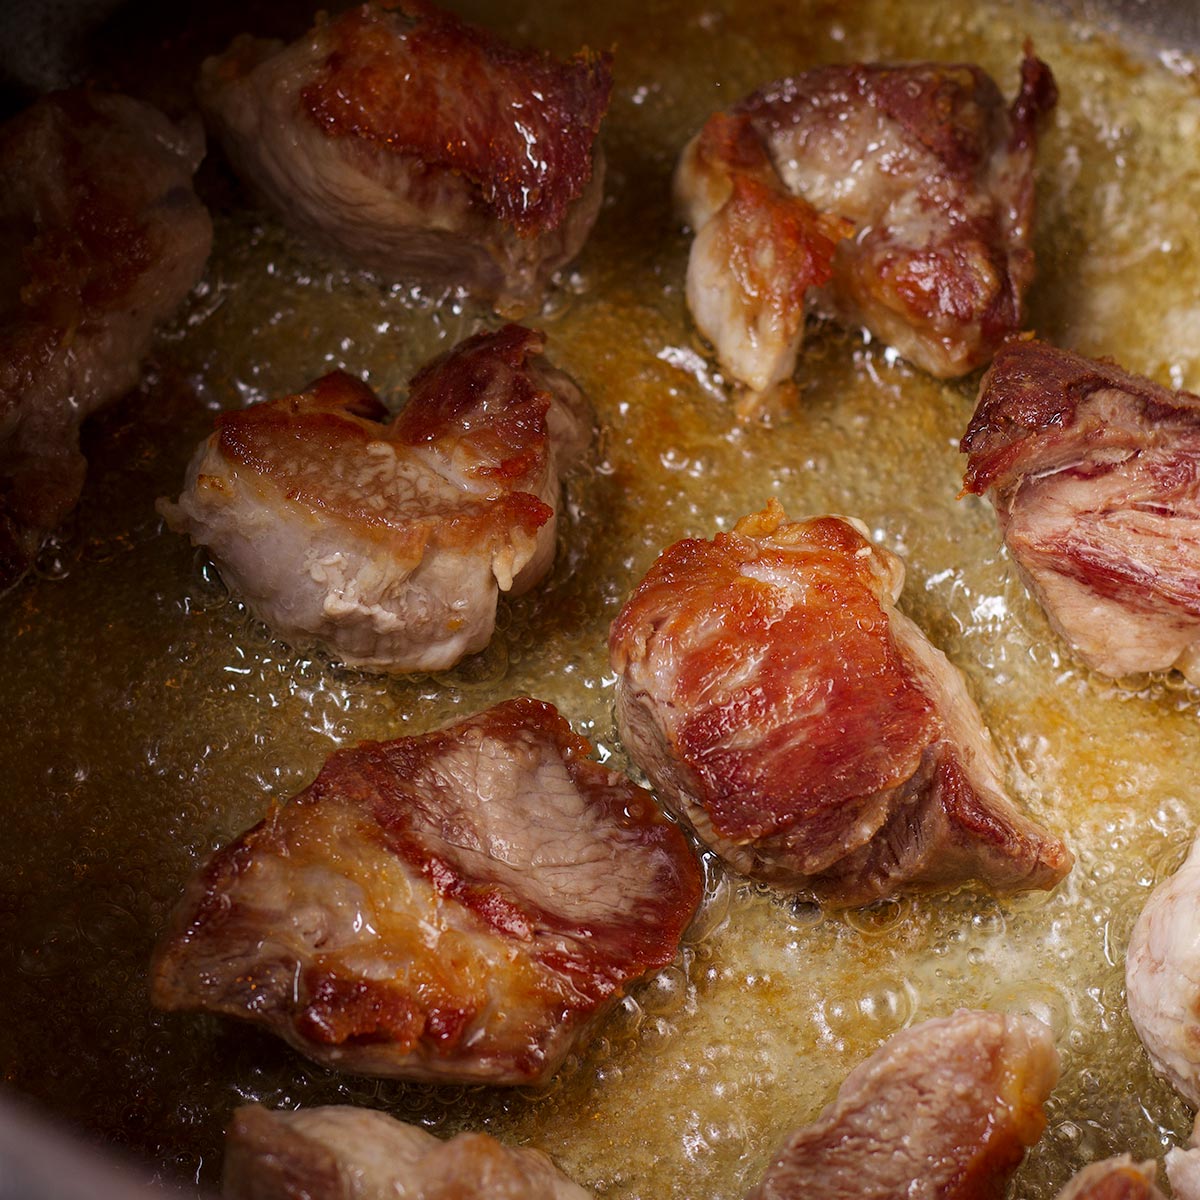 Pieces of pork cooking in oil in a saucepan until they are golden brown.